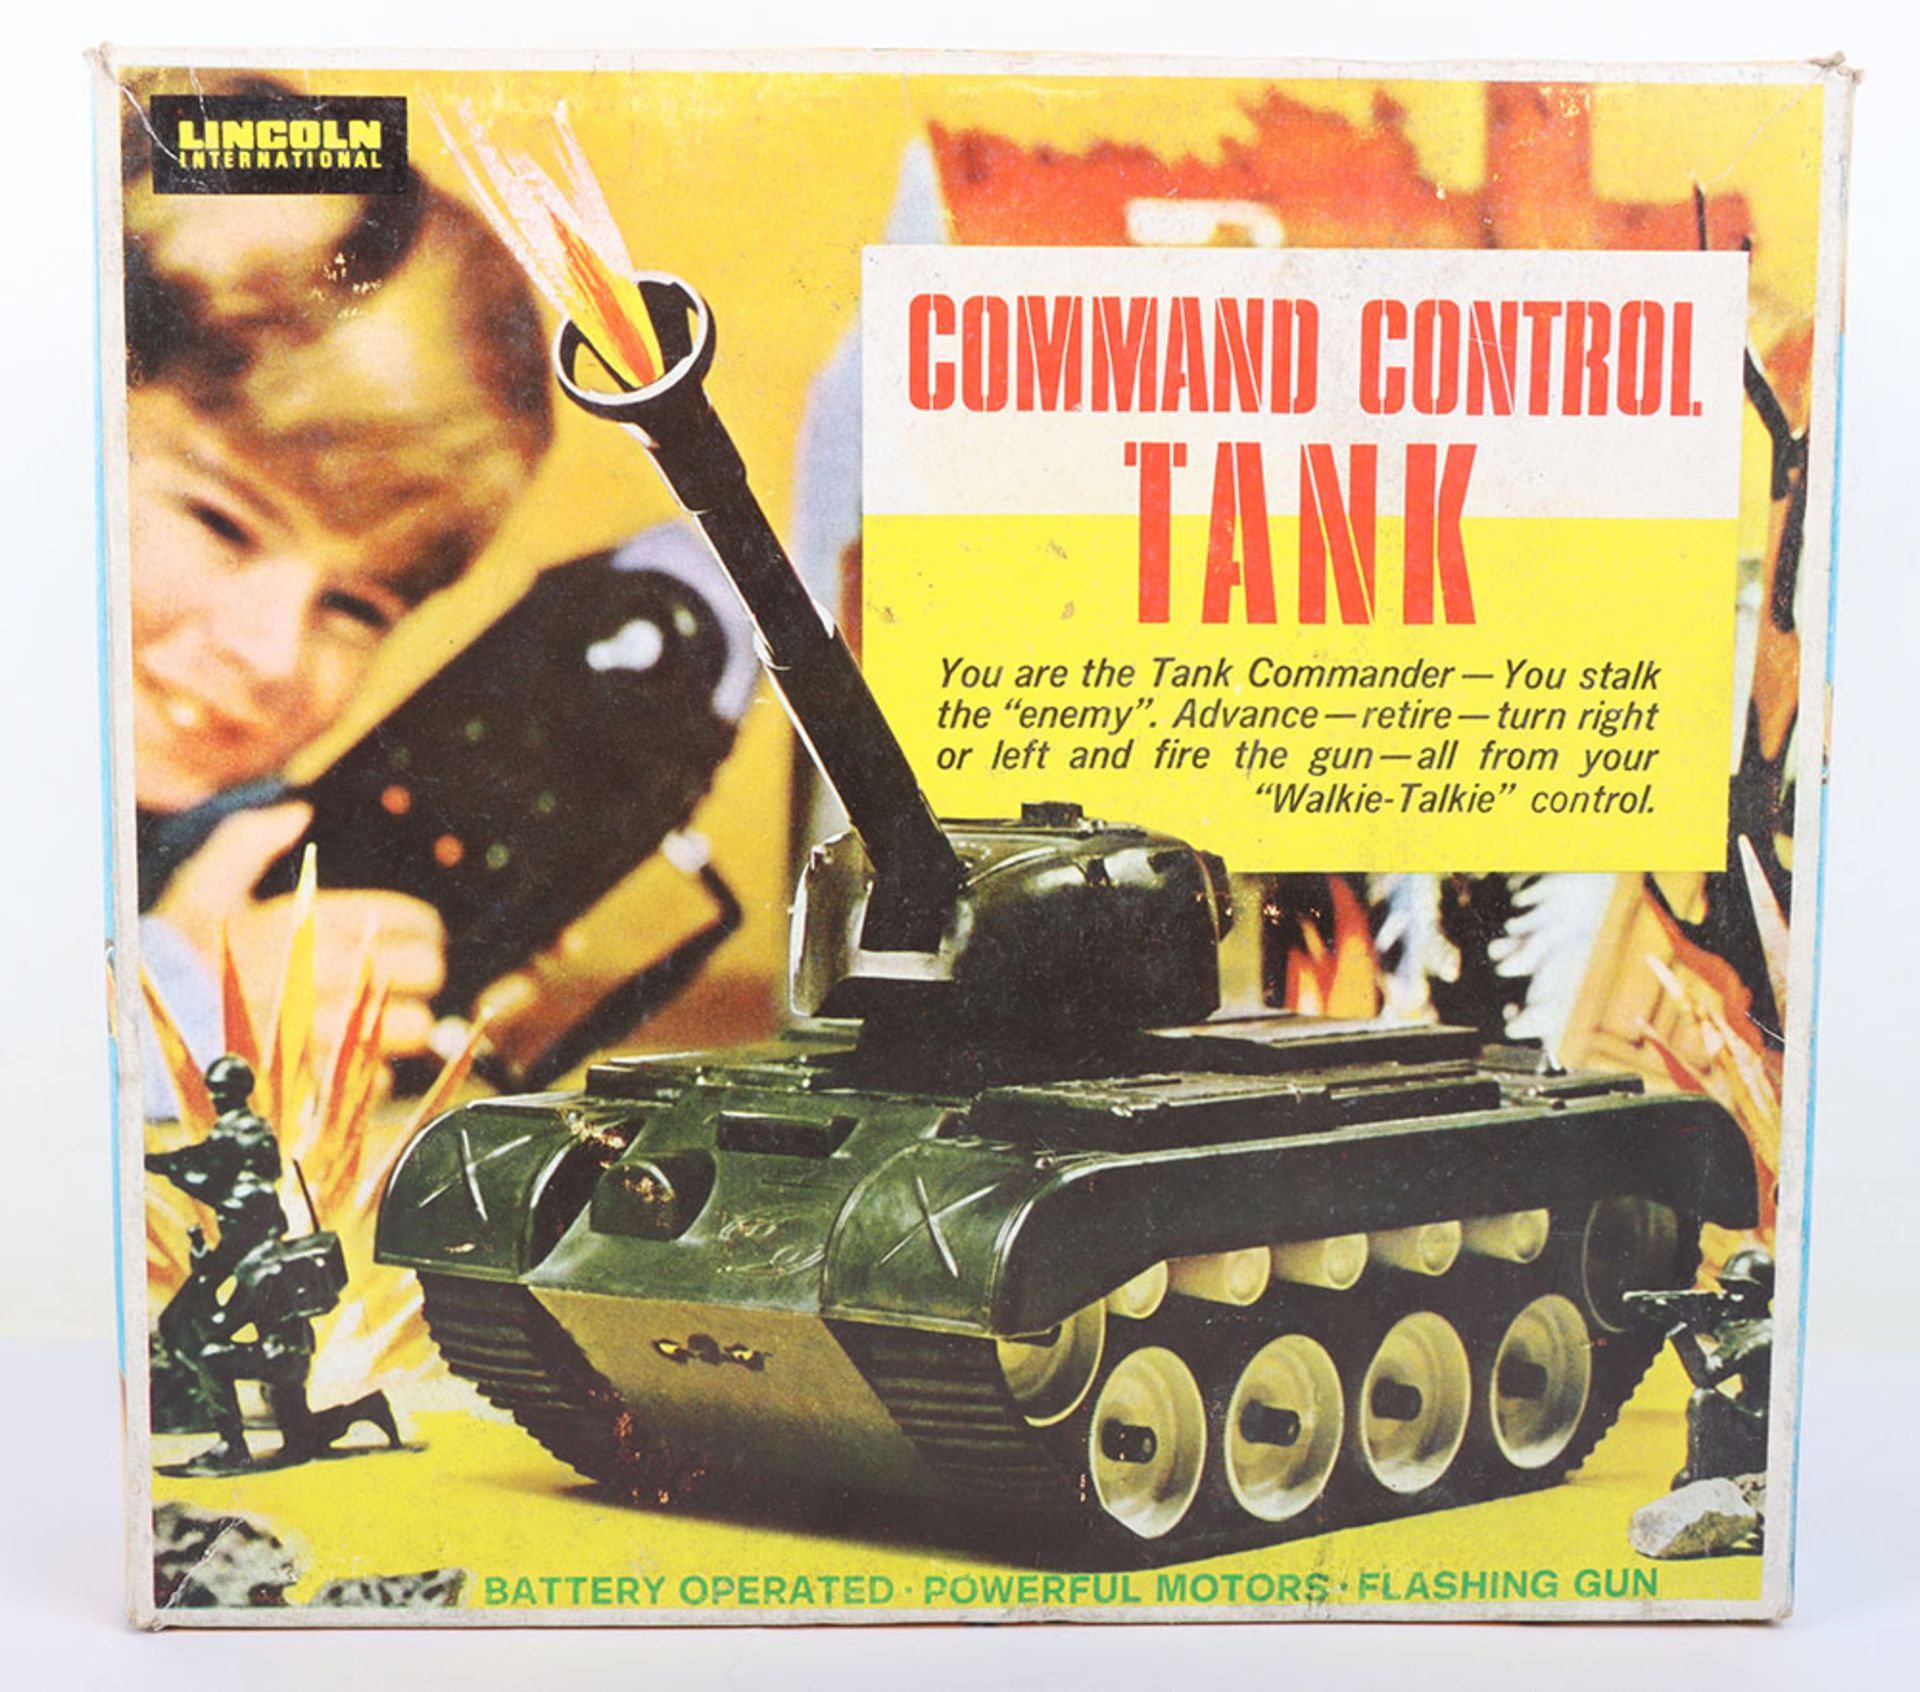 Lincoln International Empire Made Hong Kong Plastic Battery Powered Command Control Tank - Image 3 of 6